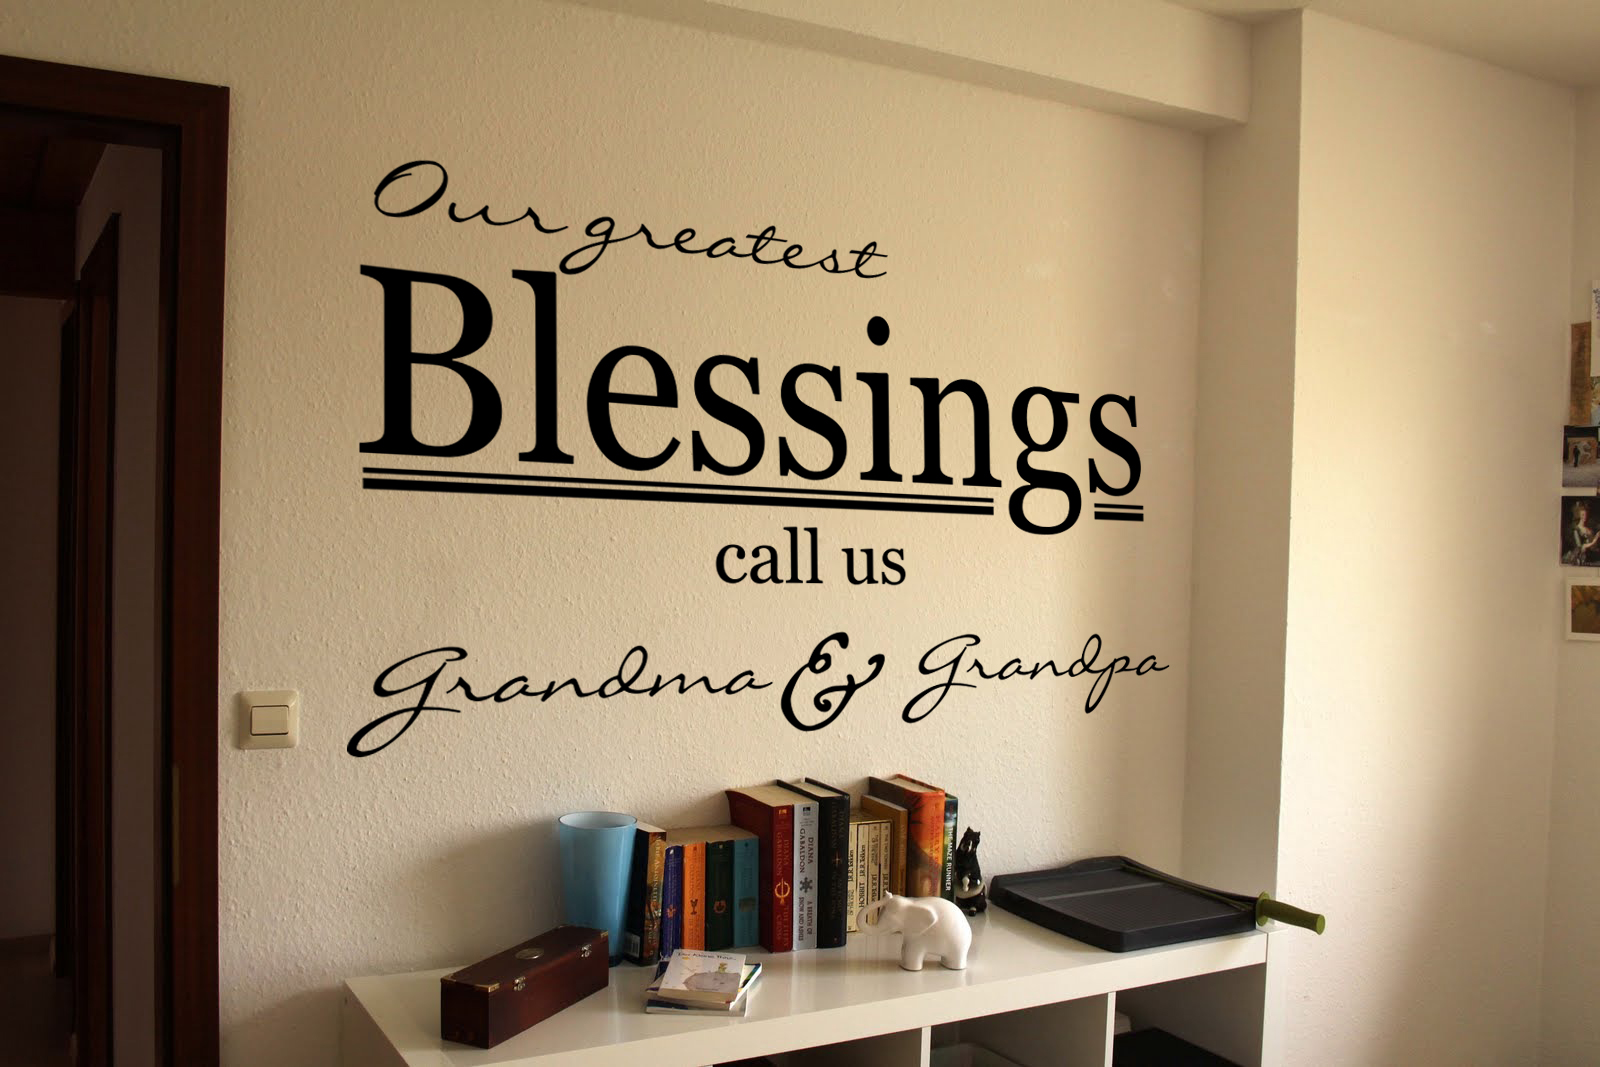 Grandkids Welcome Funny Decor vinyl wall decal quote sticker Inspirational 